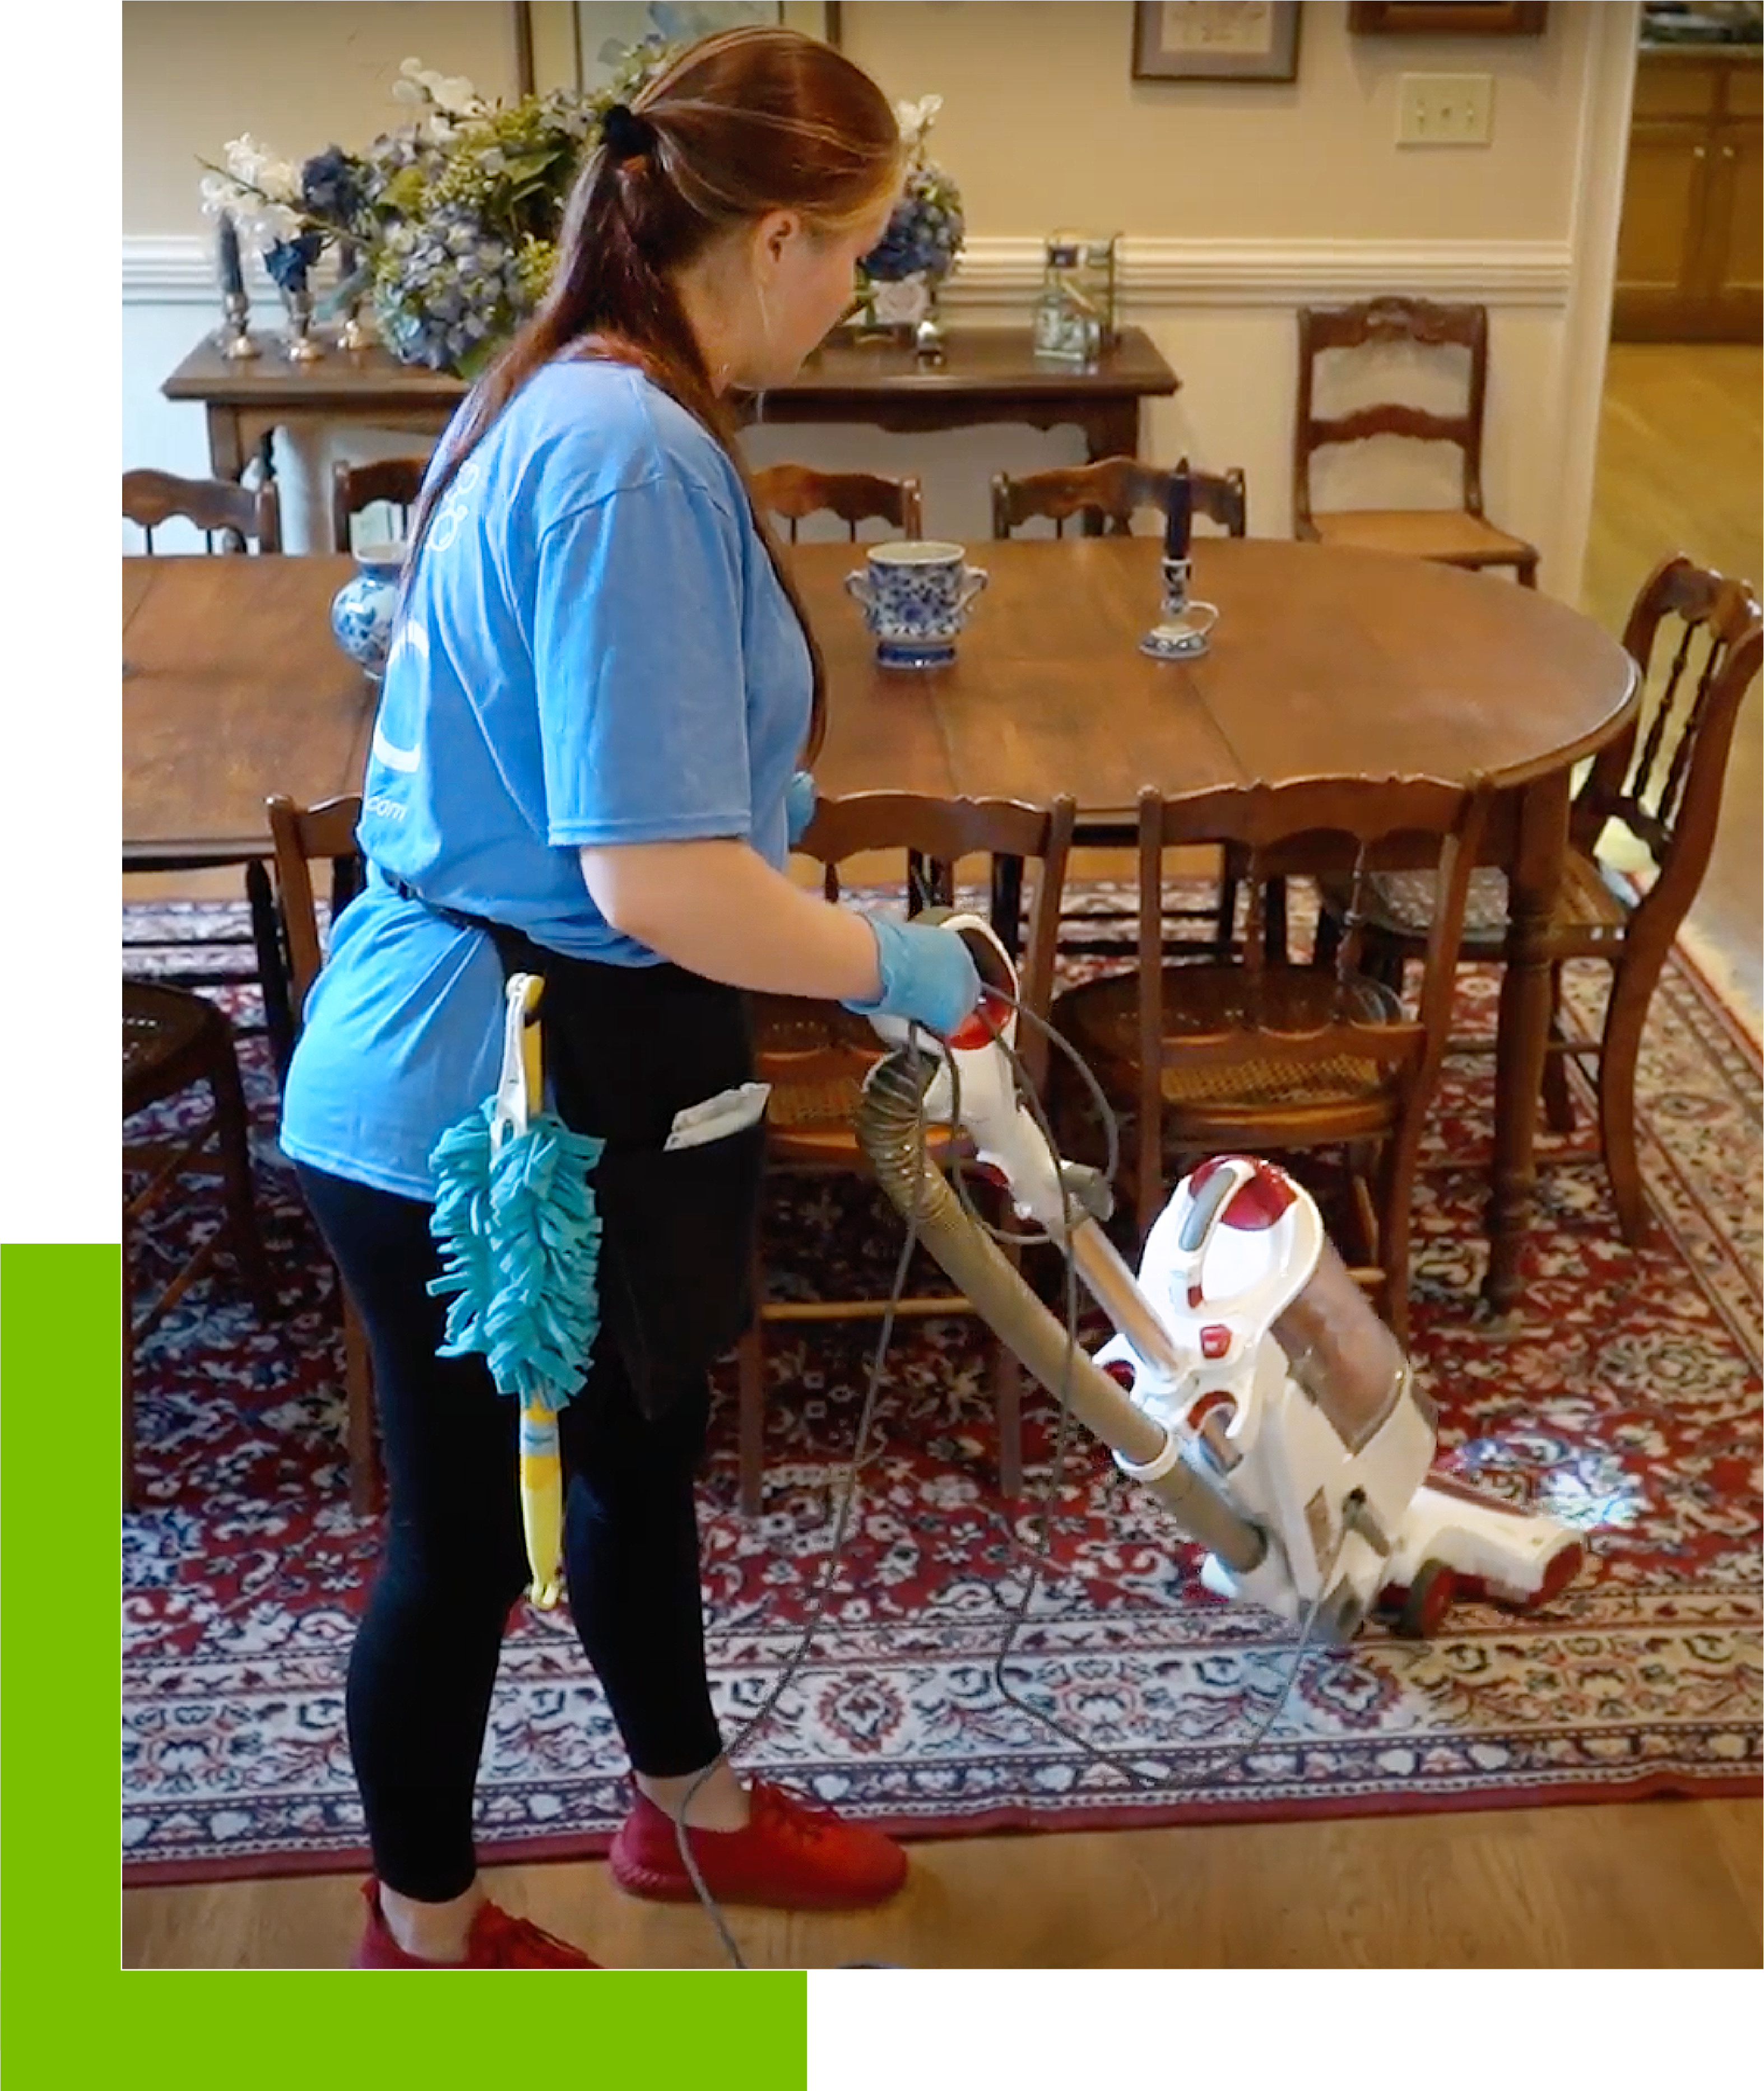 Looking for house cleaning services near me in Monroe, GA?